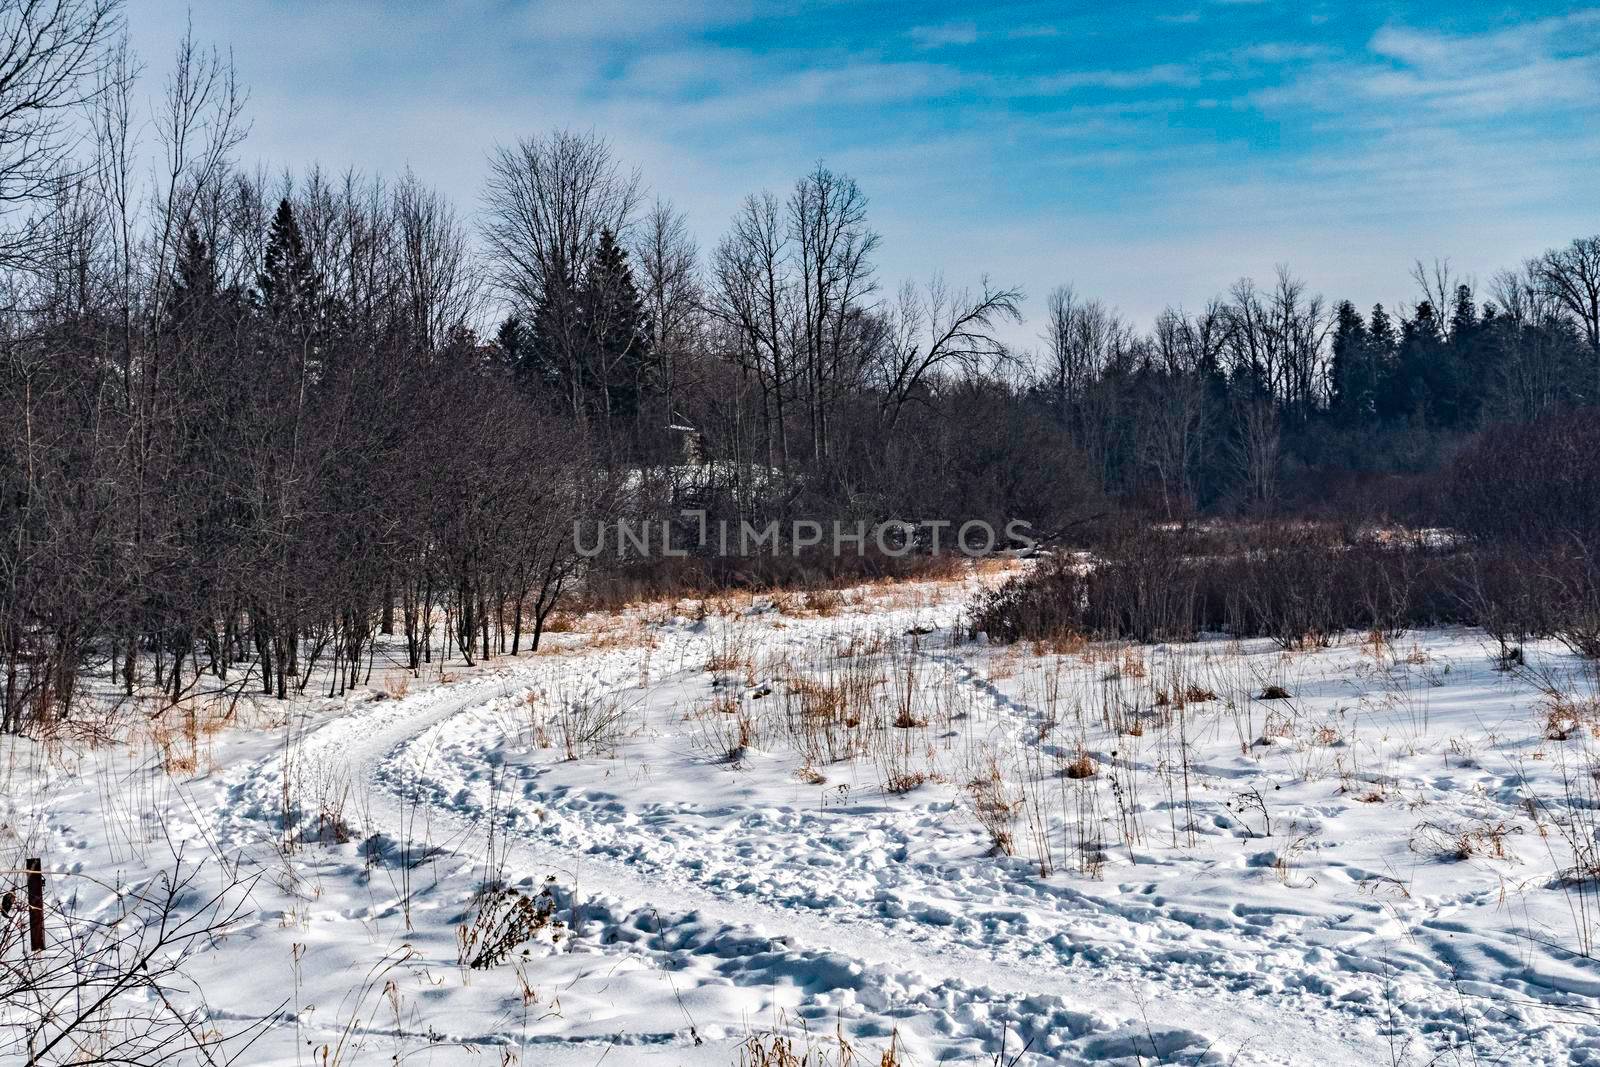 Landscape, traces of people and animals on the path around the snow-covered field